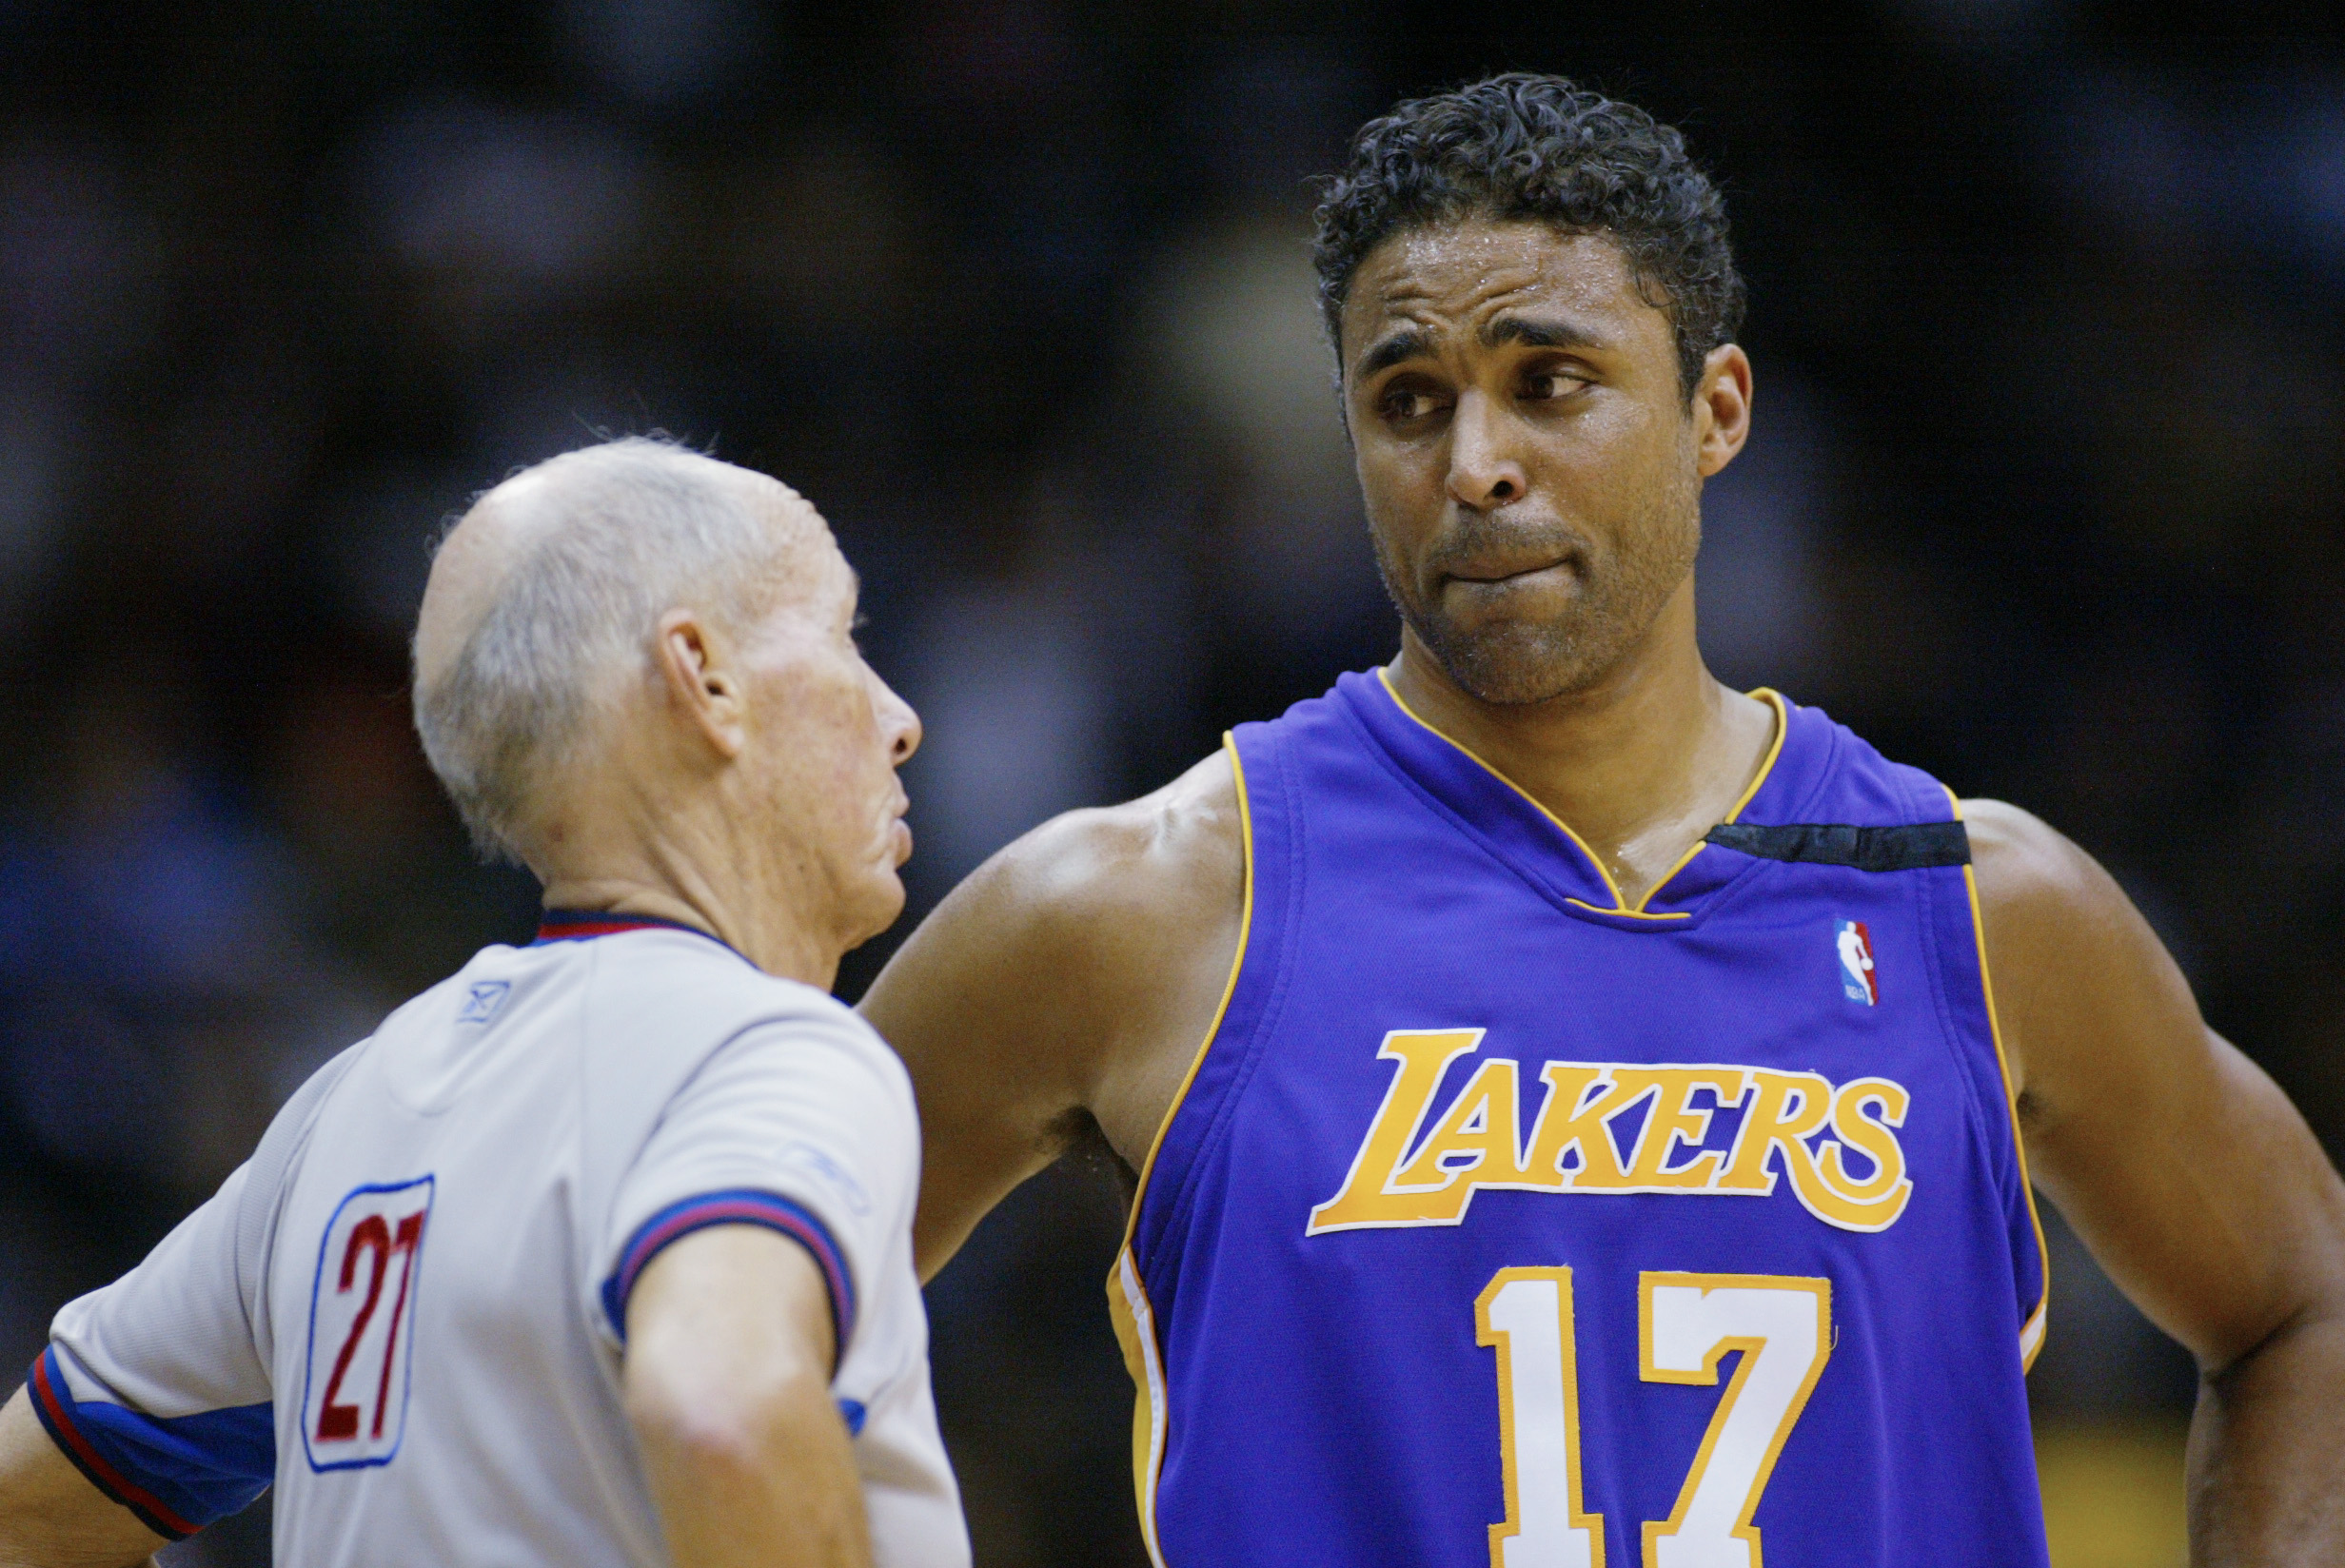 Rick Fox was ineligible to play his senior year of high school.